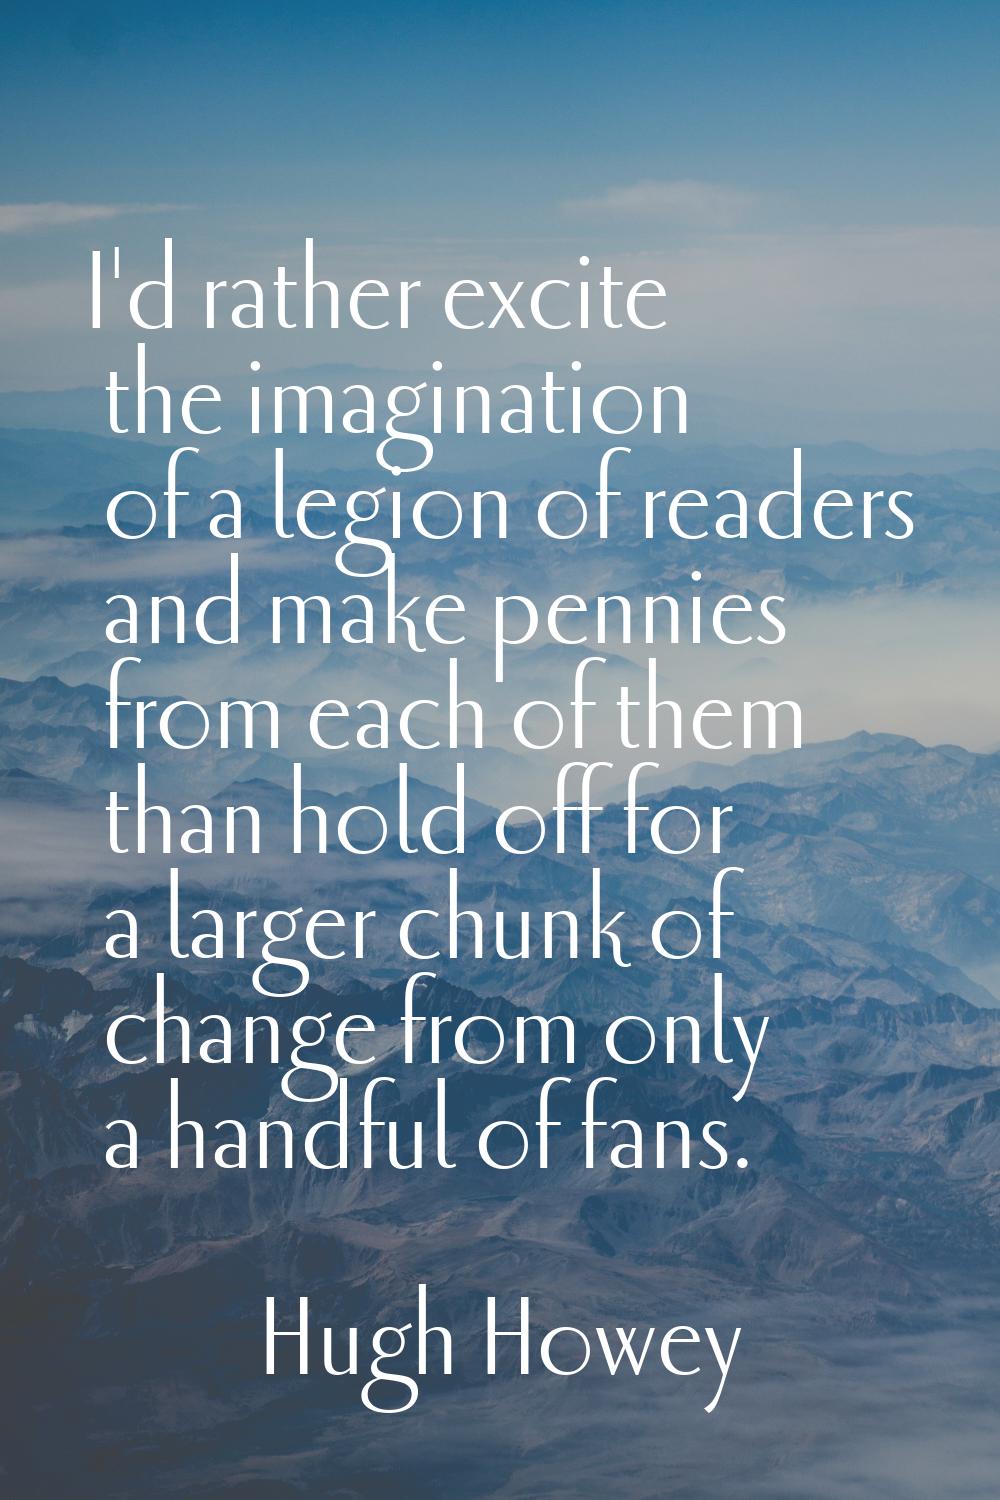 I'd rather excite the imagination of a legion of readers and make pennies from each of them than ho